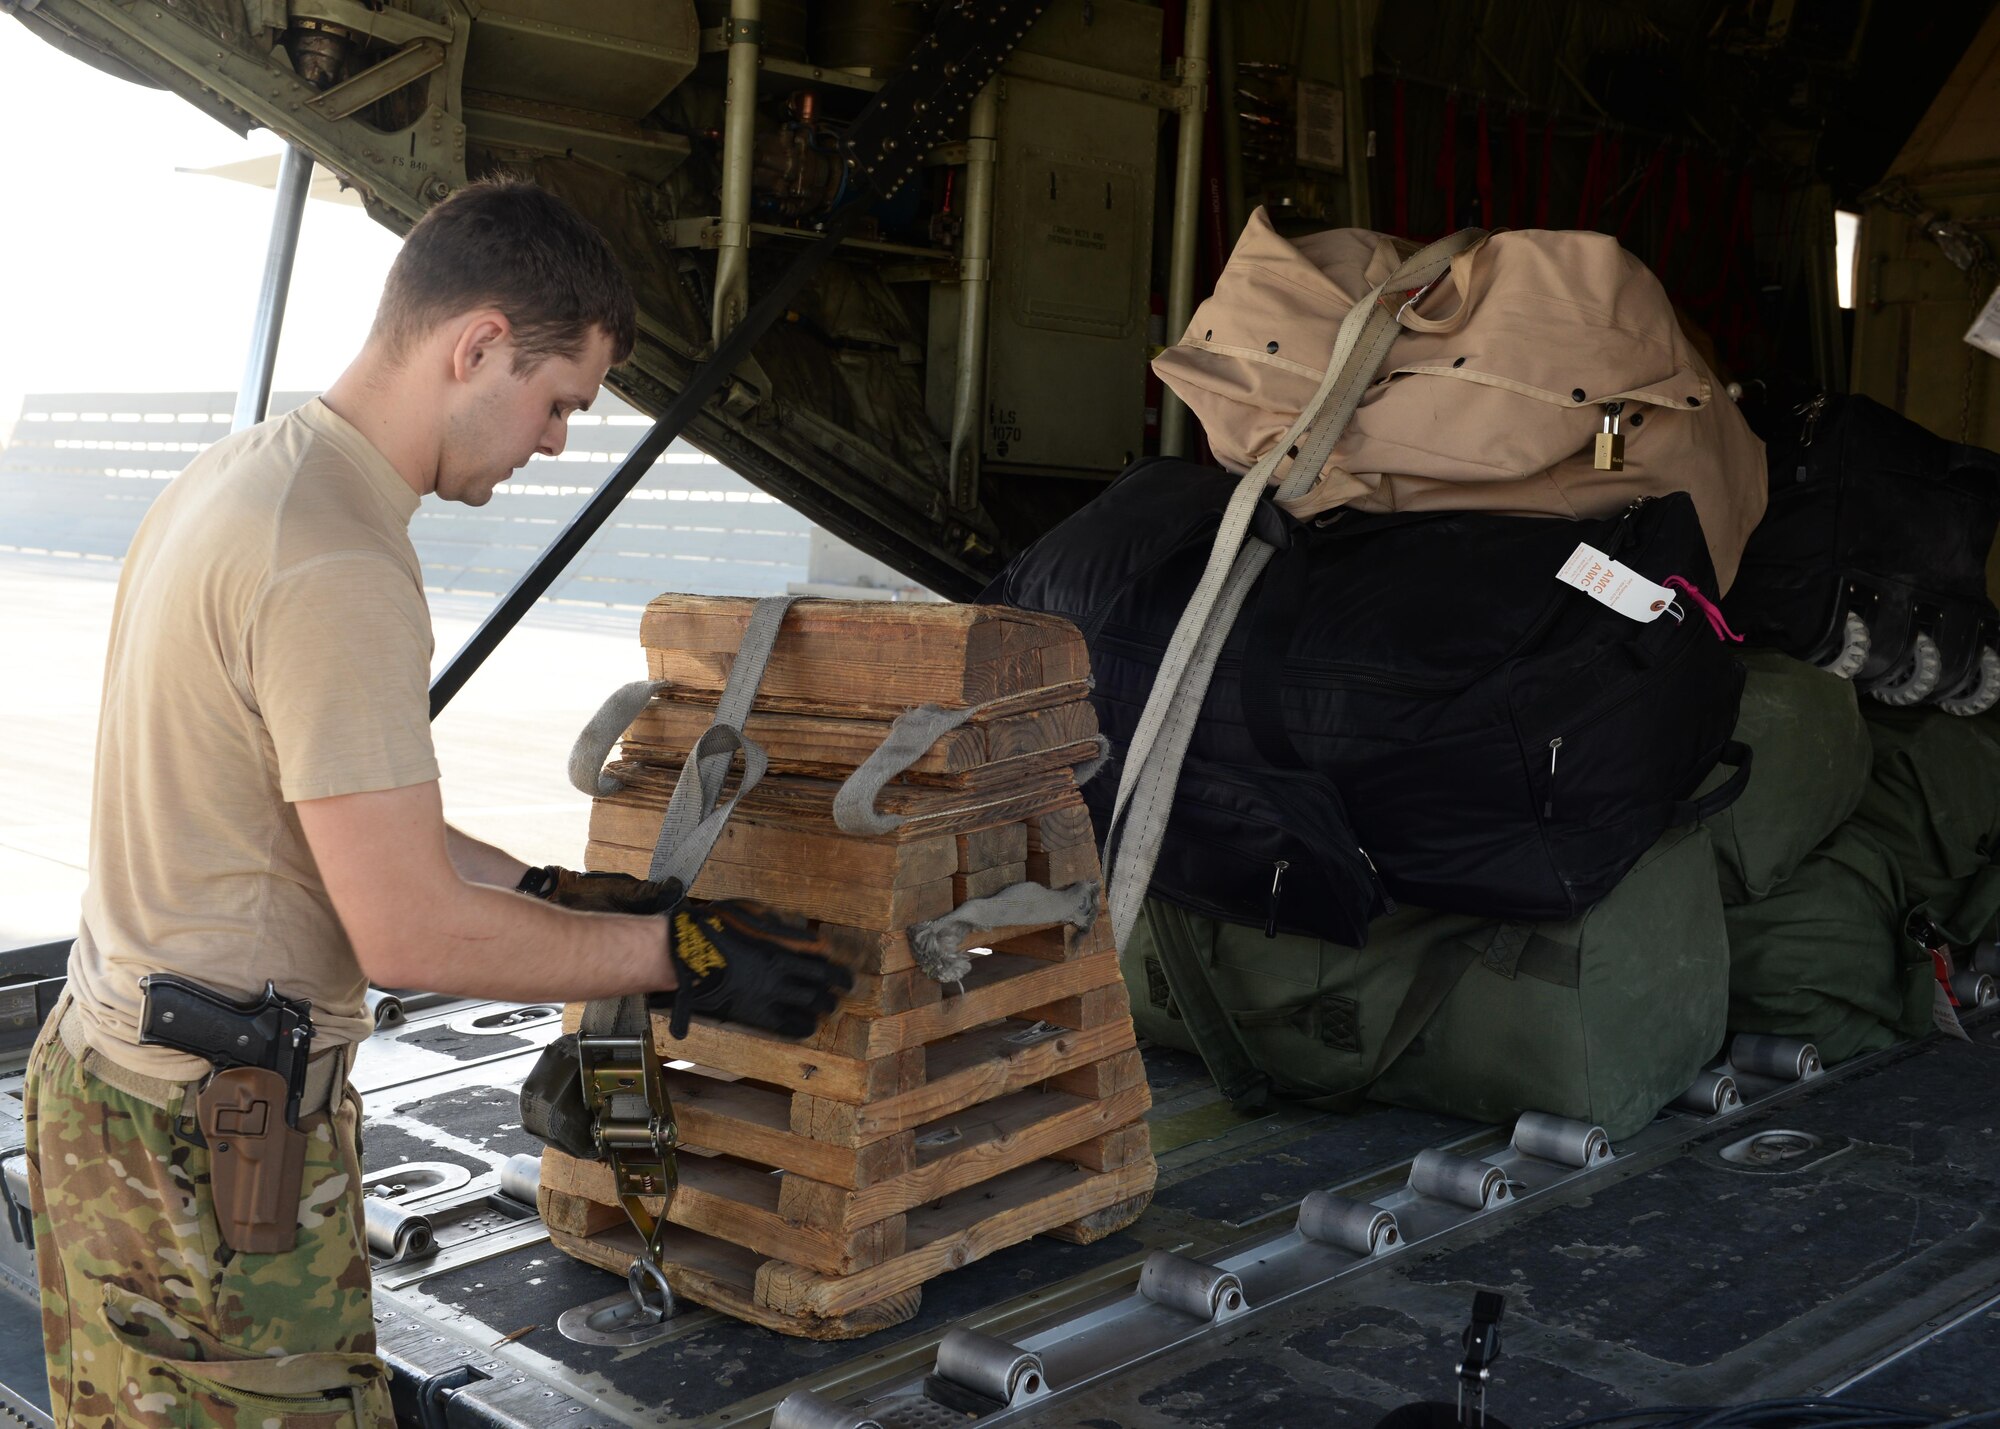 U.S. Air Force Staff Sgt. Casey Strauss, 774th Expeditionary Airlift Squadron C-130J Super Hercules aircraft loadmaster secures cargo onto an aircraft before takeoff Aug. 28, 2015 at Bagram Airfield, Afghanistan. Strauss and his fellow loadmasters are responsible for loading and unloading cargo, passenger safety in flight, and ensuring the aircraft stays within the proper weight and balance limitations. (U.S. Air Force photo by Senior Airman Cierra Presentado/Released)